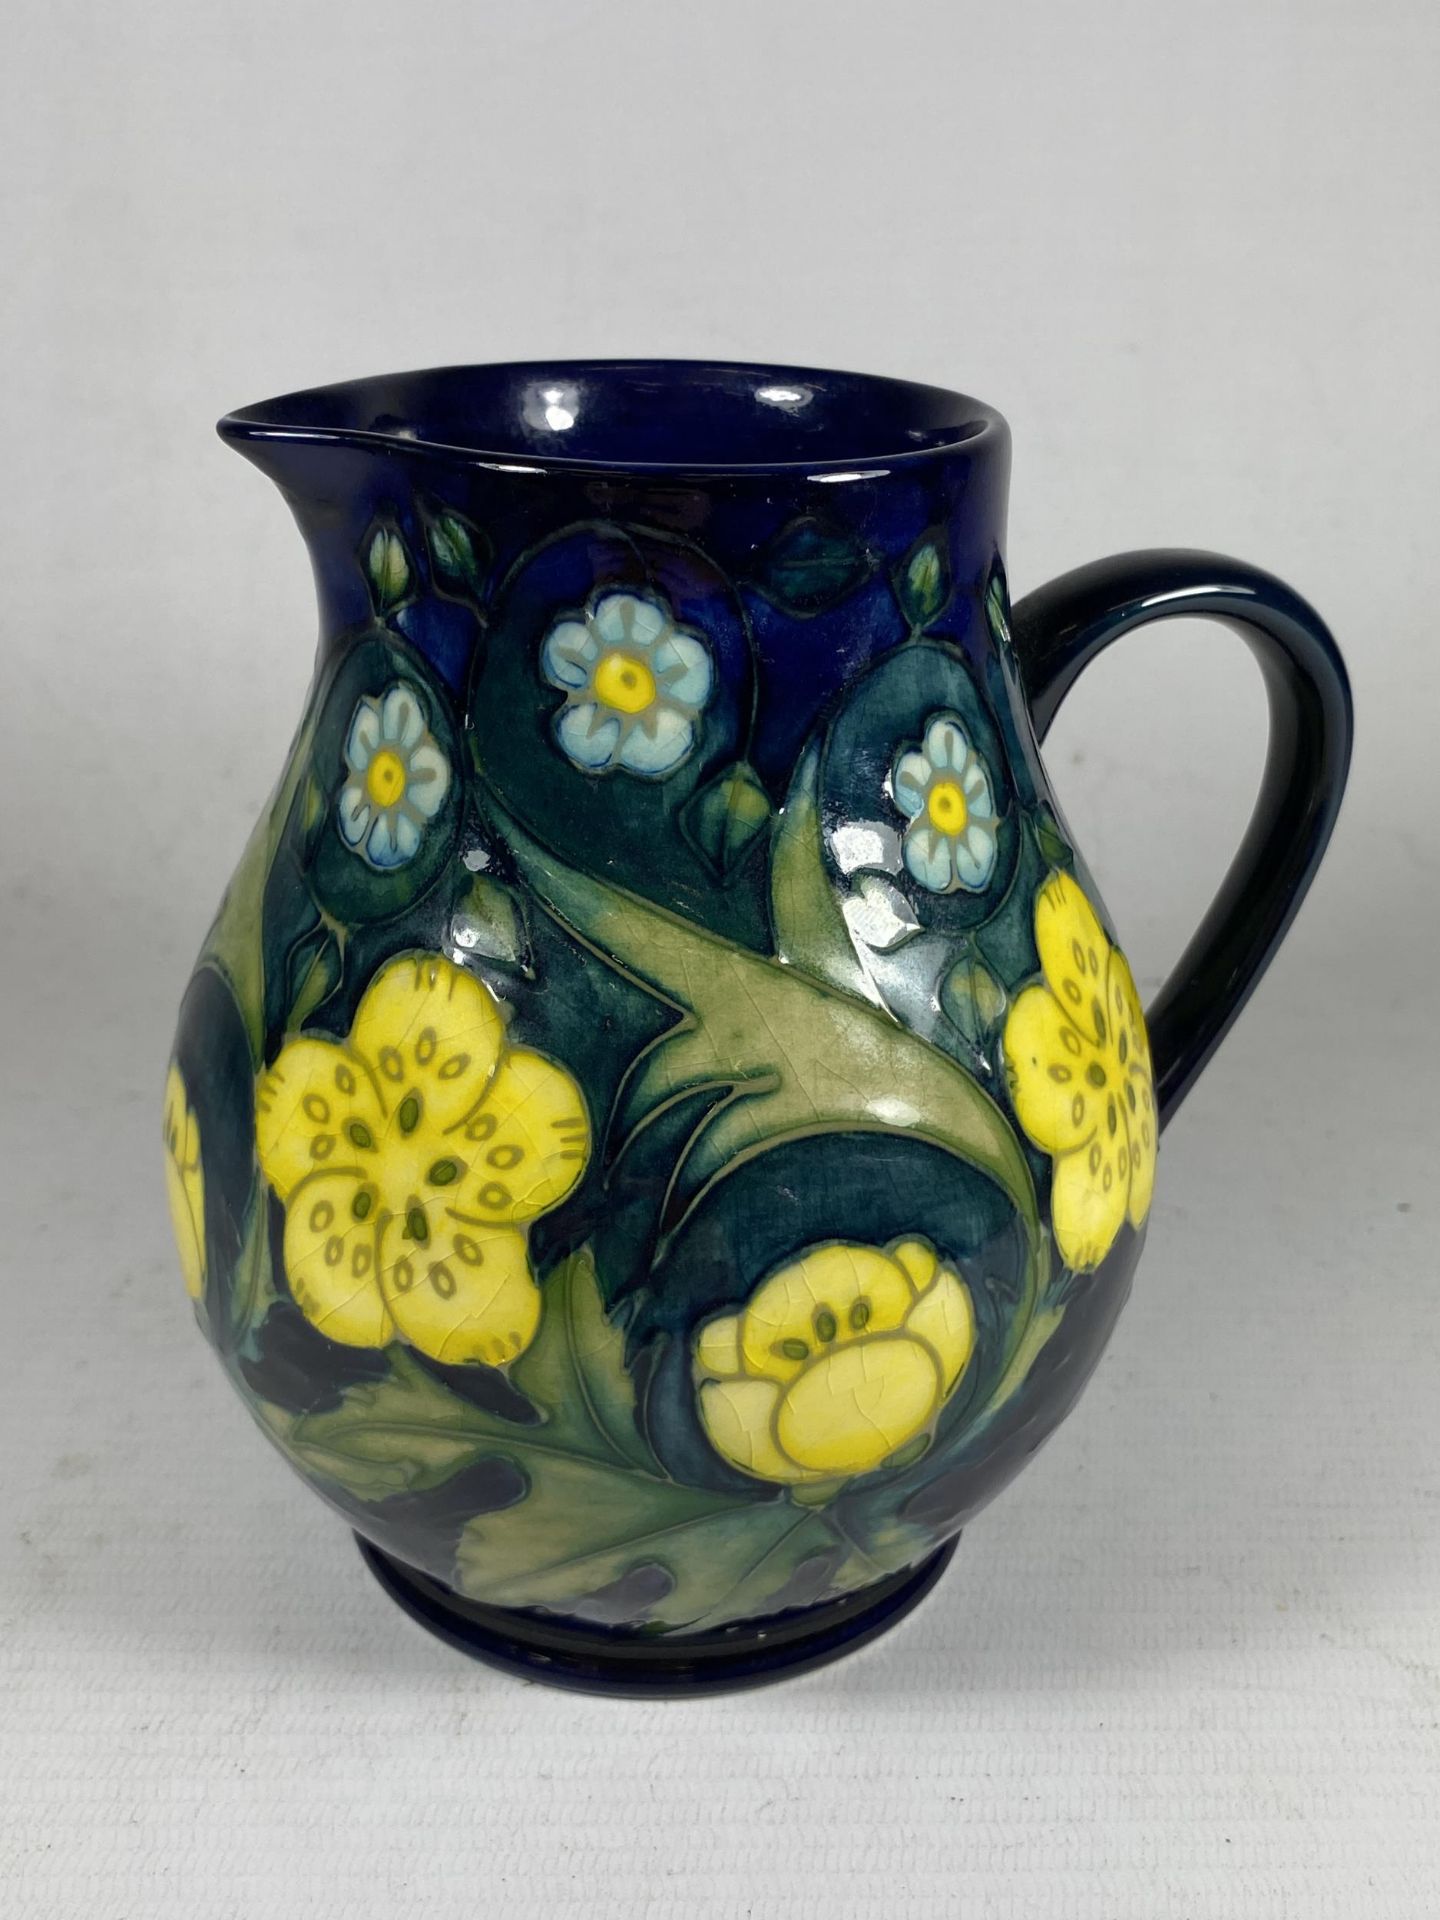 A MOORCROFT POTTERY BUTTERCUP PATTERN JUG BY SALLY TUFFIN